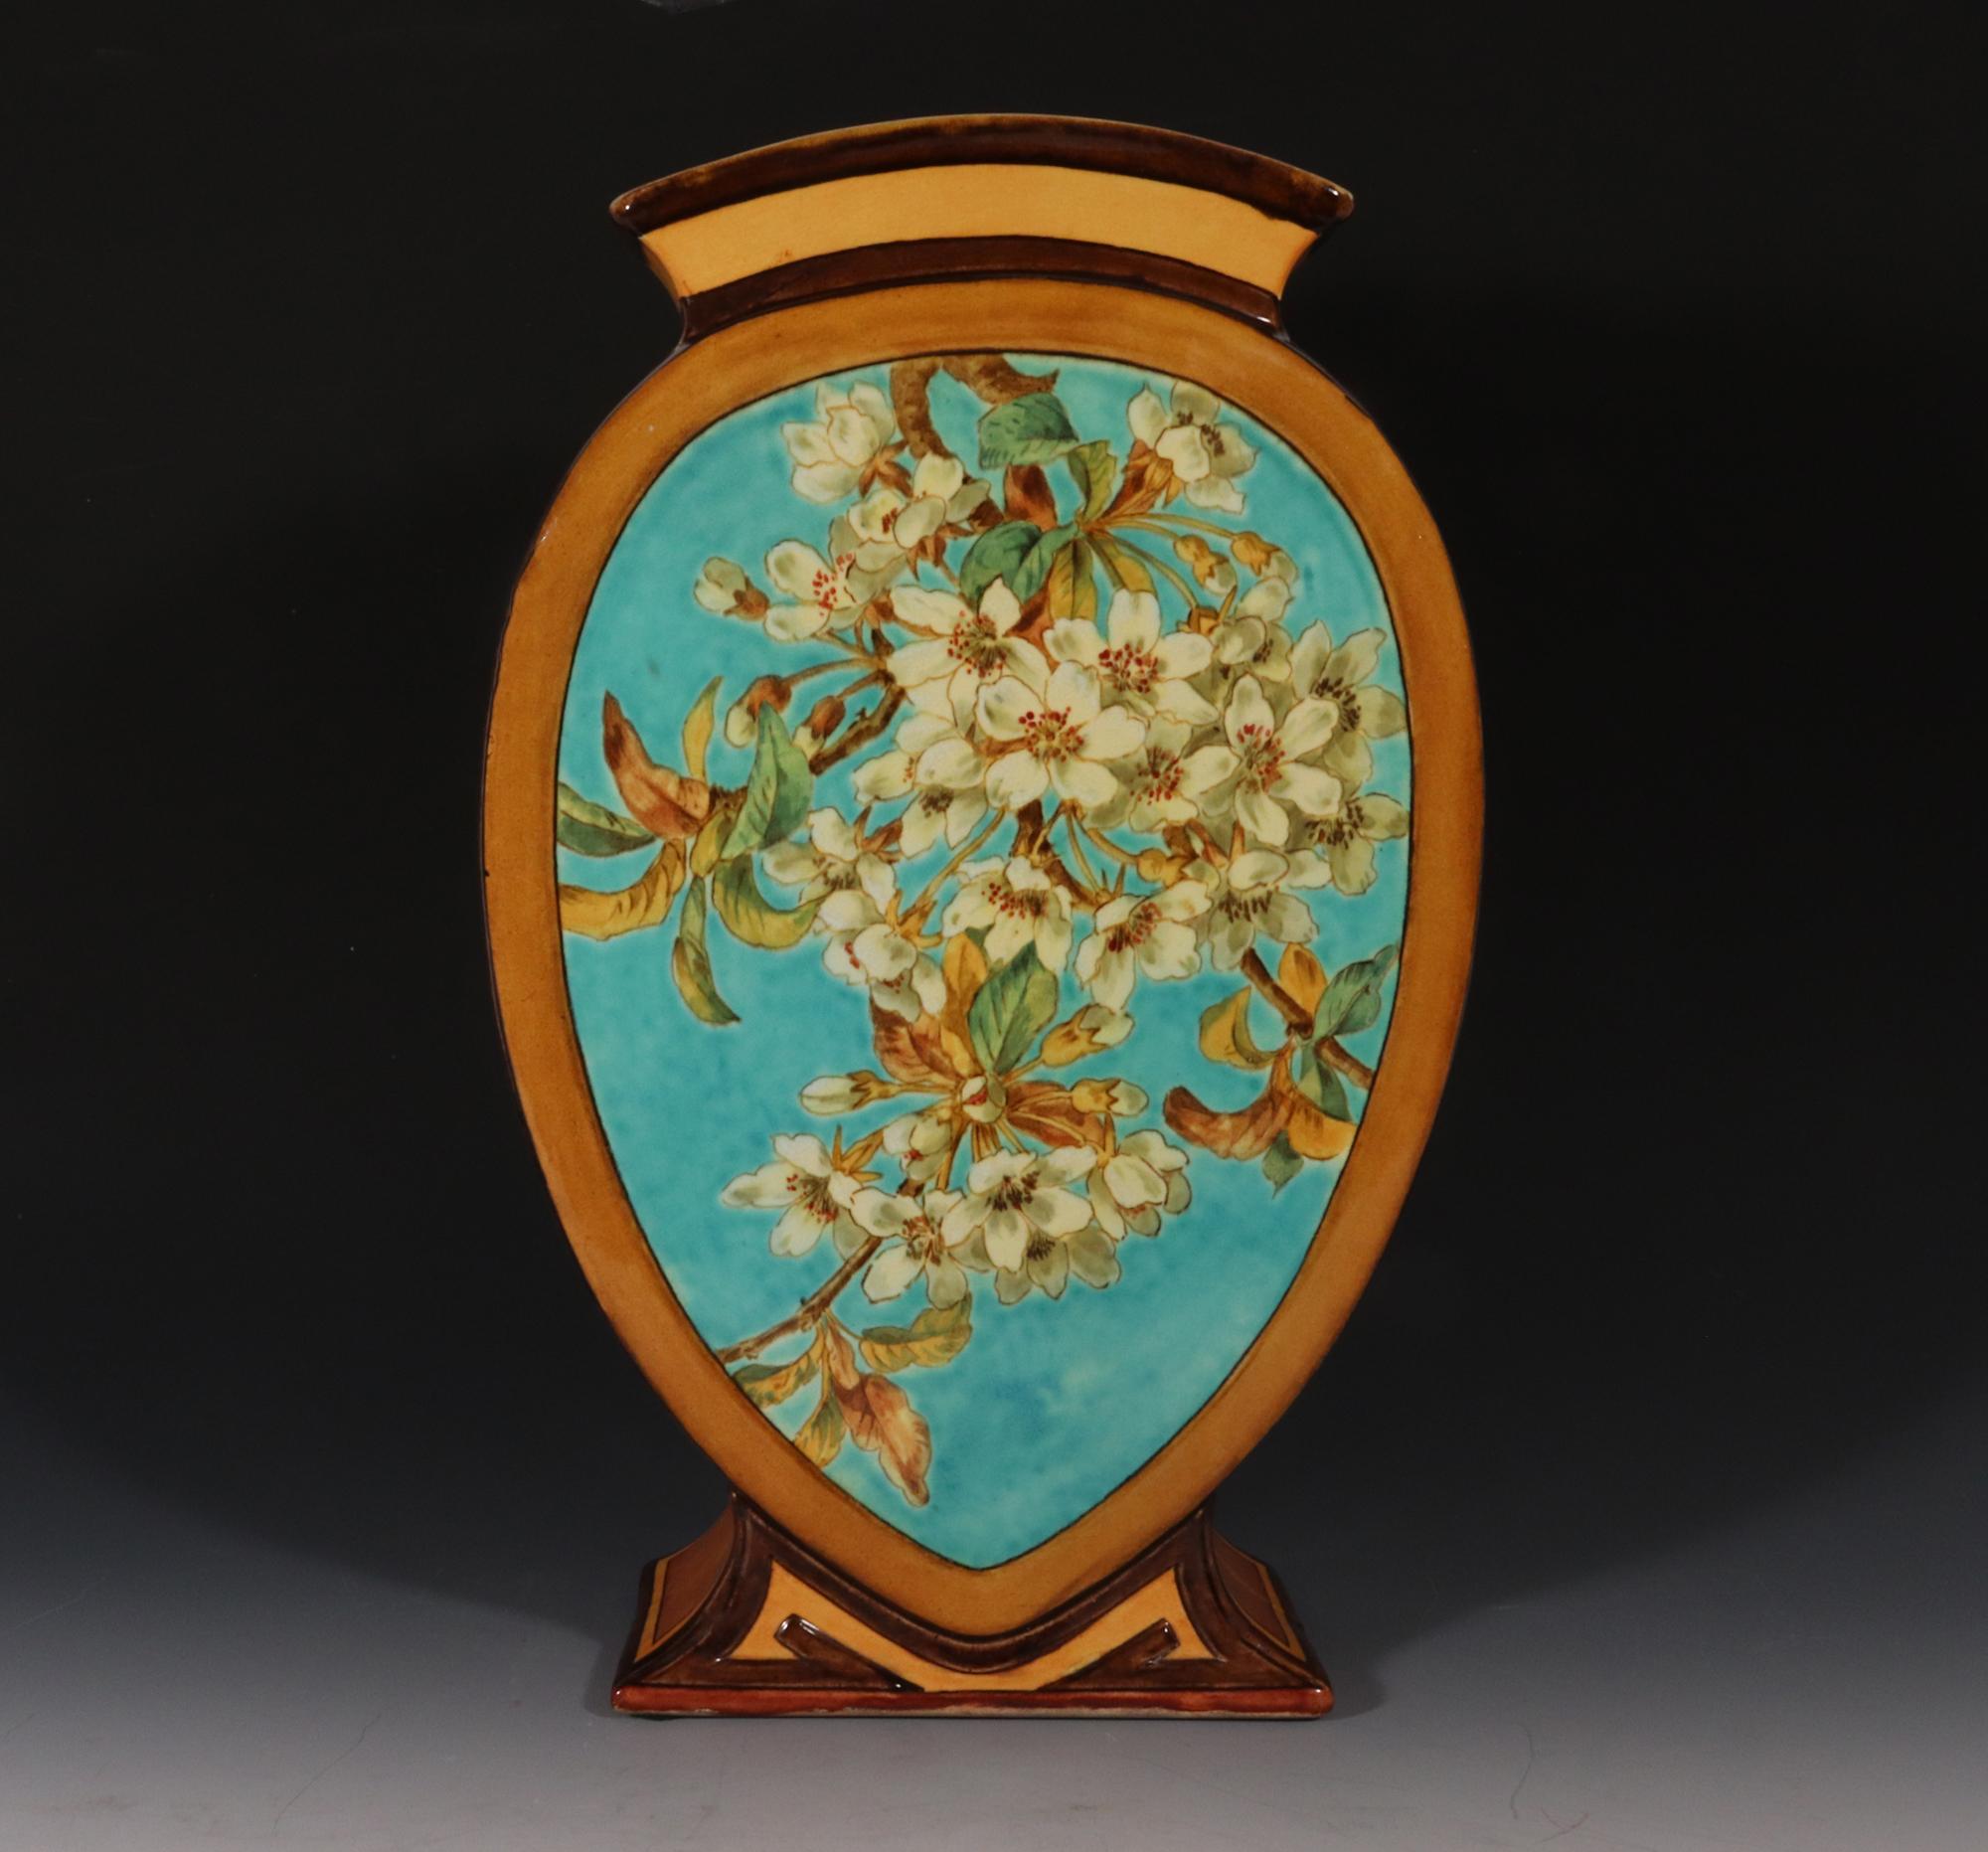 Doulton Faience Shaped Botanical Pottery Vase,
Aesthetic Movement,
Signed by Artist Mary M Arding,
Early 1880s

The unusually shaped molded vase with a flared foot has a reverse pear shape with a similarly shaped aqua-colored panels with